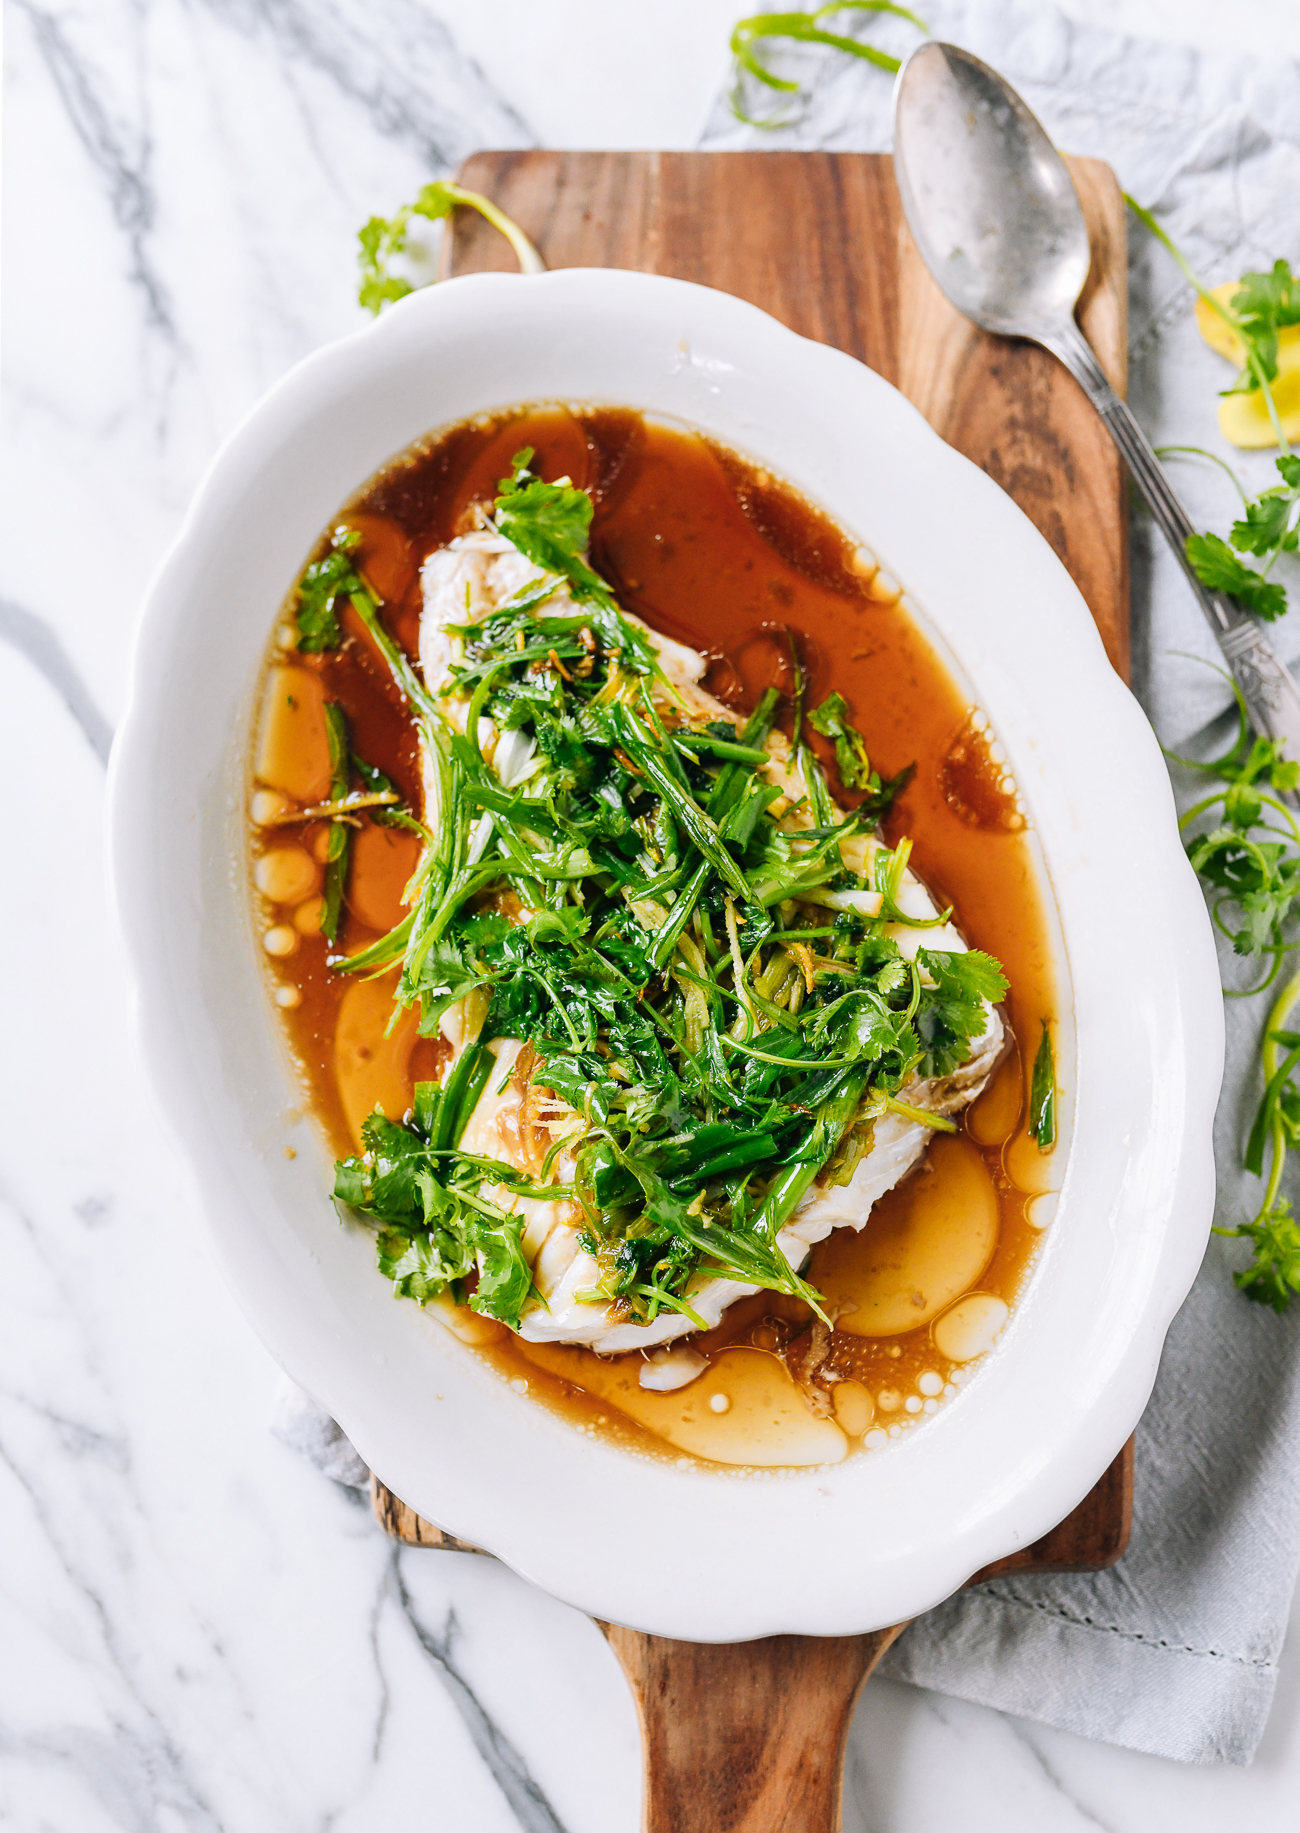 Cantonese Steamed Fish with Ginger, Scallions, and Cilantro